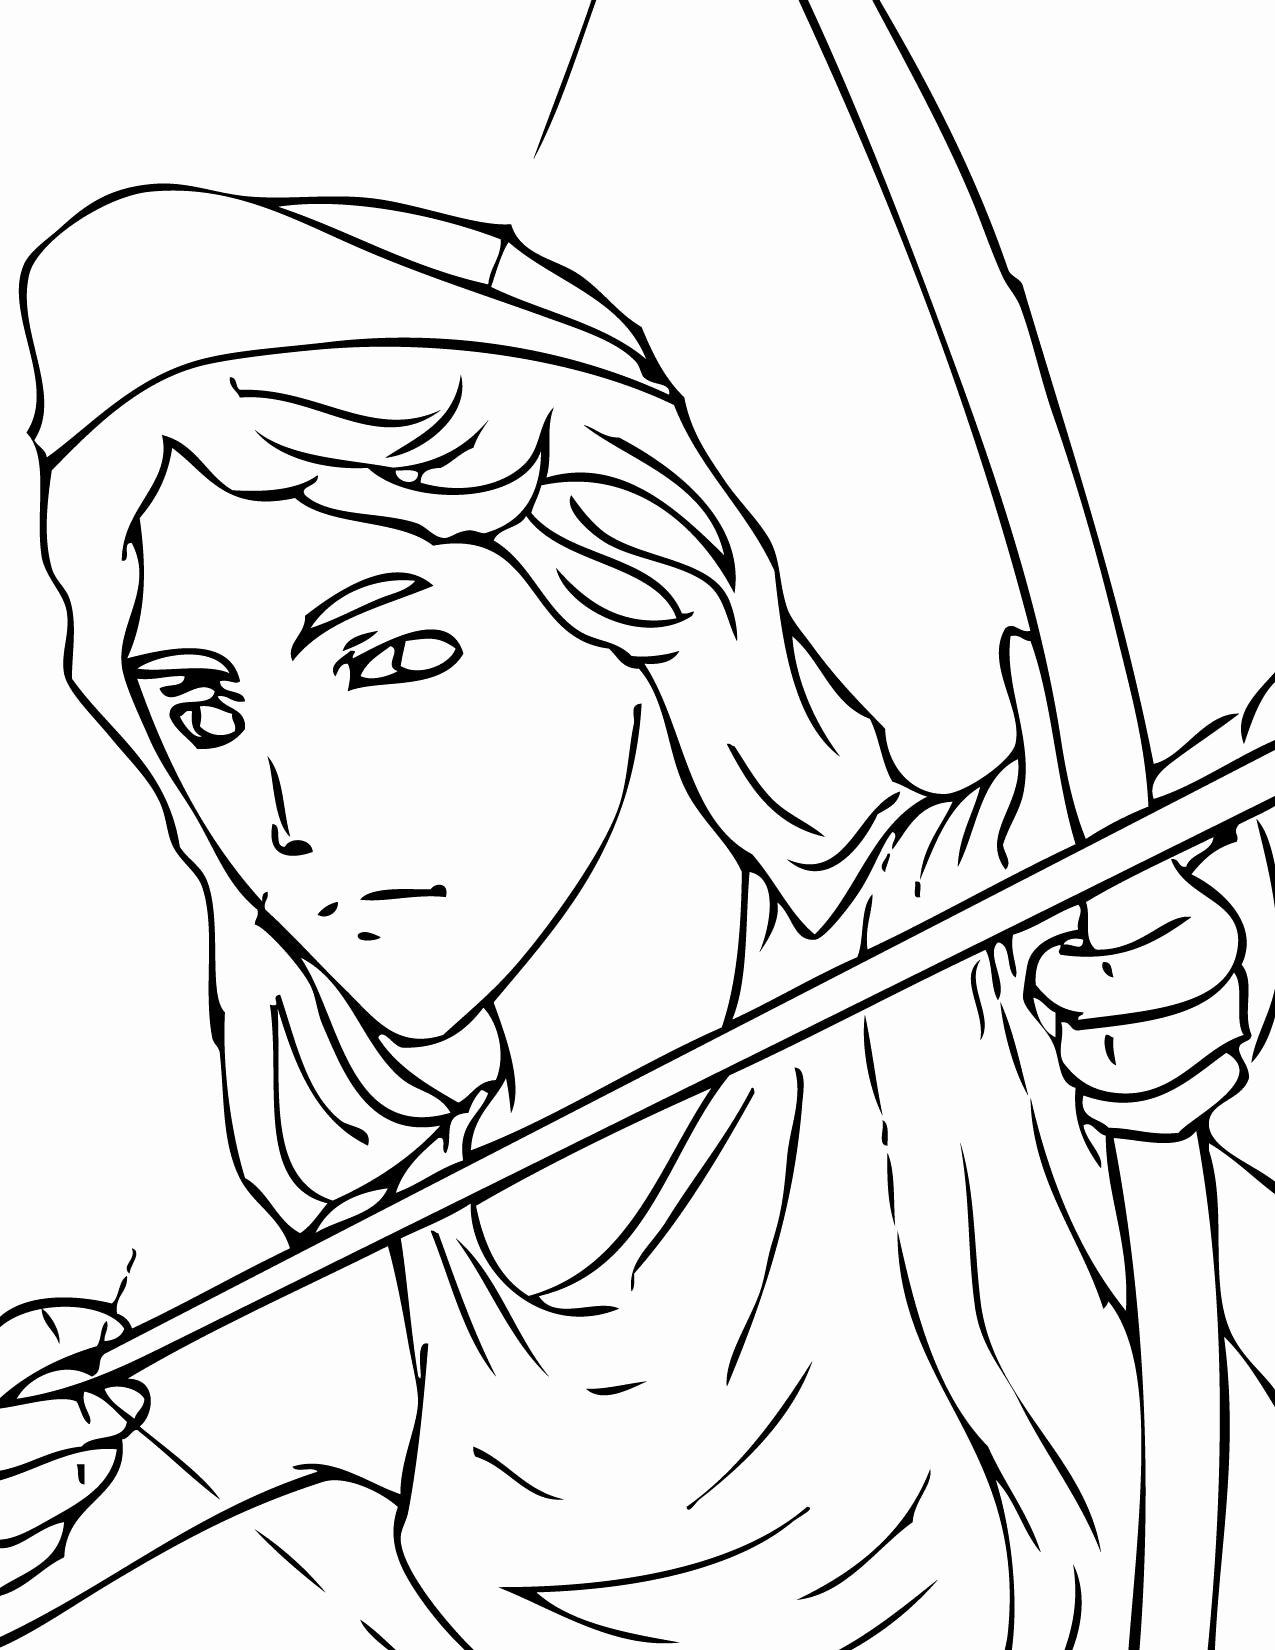 Greek Gods Coloring Pages At Getcolorings.com | Free Printable